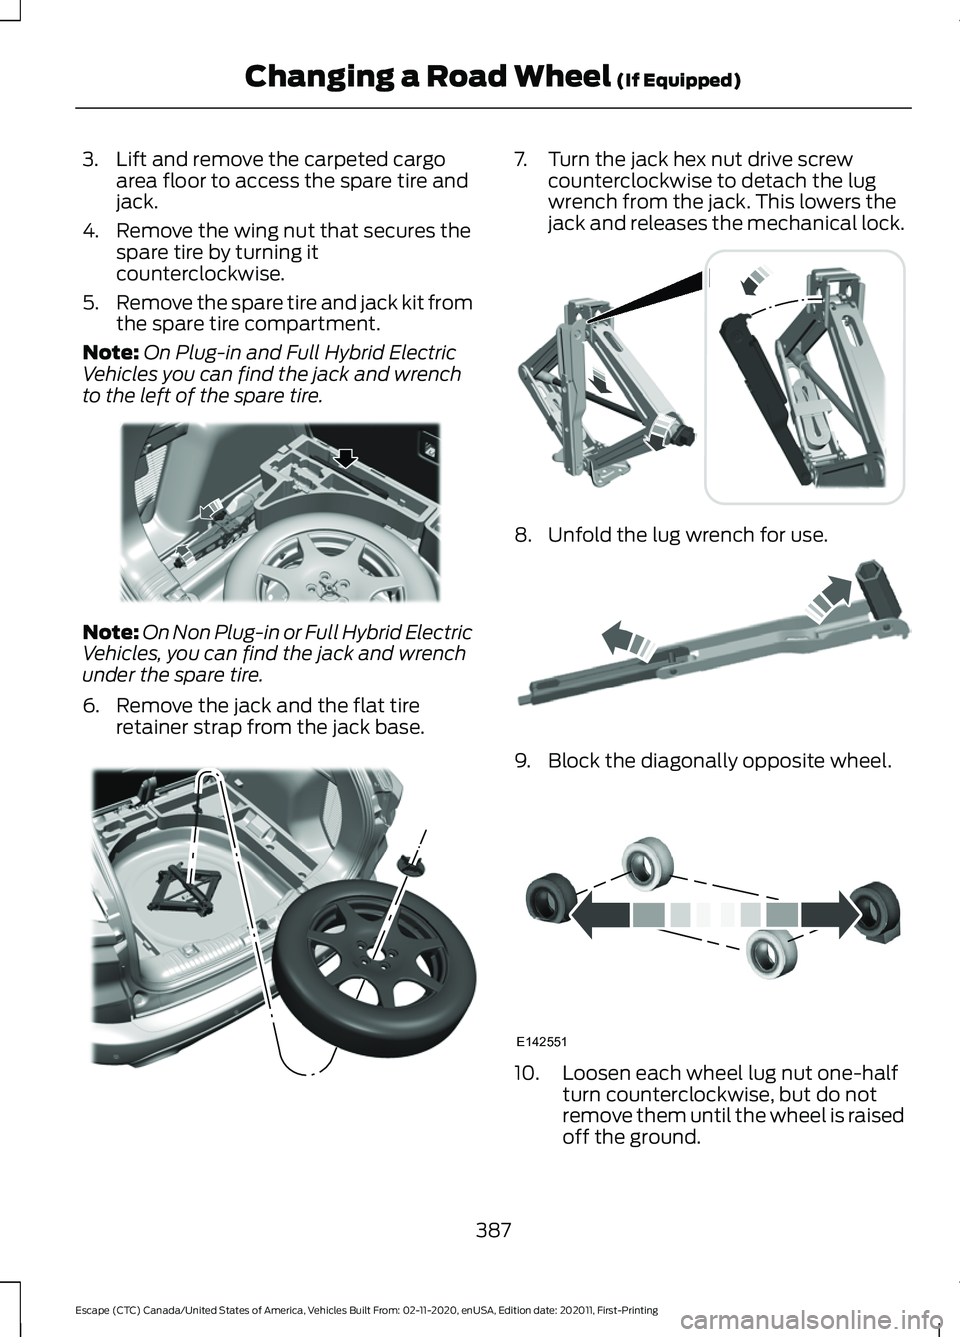 FORD ESCAPE 2021 User Guide 3. Lift and remove the carpeted cargo
area floor to access the spare tire and
jack.
4. Remove the wing nut that secures the spare tire by turning it
counterclockwise.
5. Remove the spare tire and jack